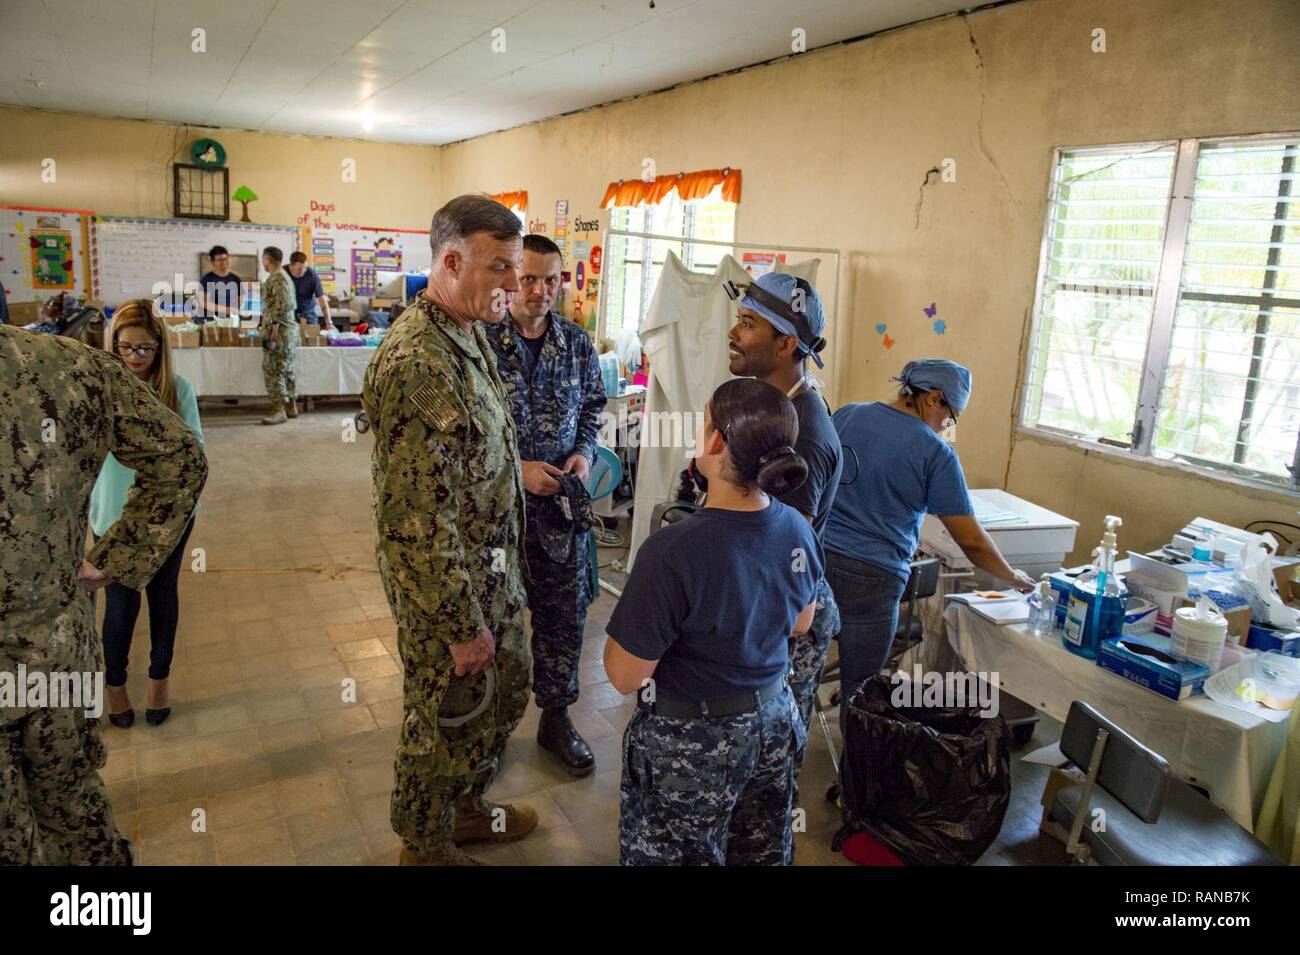 TRUJILLO, Honduras (Feb. 23, 2017) – Rear Adm. Sean S. Buck (left), Commander U.S. Naval Forces Southern Command/U.S. 4th Fleet NAVSO/FOURTHFLT), speaks with Sailors during a tour of the Continuing Promise 2017 (CP-17) medical site in support of the mission's visit to Trujillo, Honduras. CP-17 is a U.S. Southern Command-sponsored and U.S. Naval Forces Southern Command/U.S. 4th Fleet-conducted deployment to conduct civil-military operations including humanitarian assistance, training engagements, and medical, dental, and veterinary support in an effort to show U.S. support and commitment to Cen Stock Photo